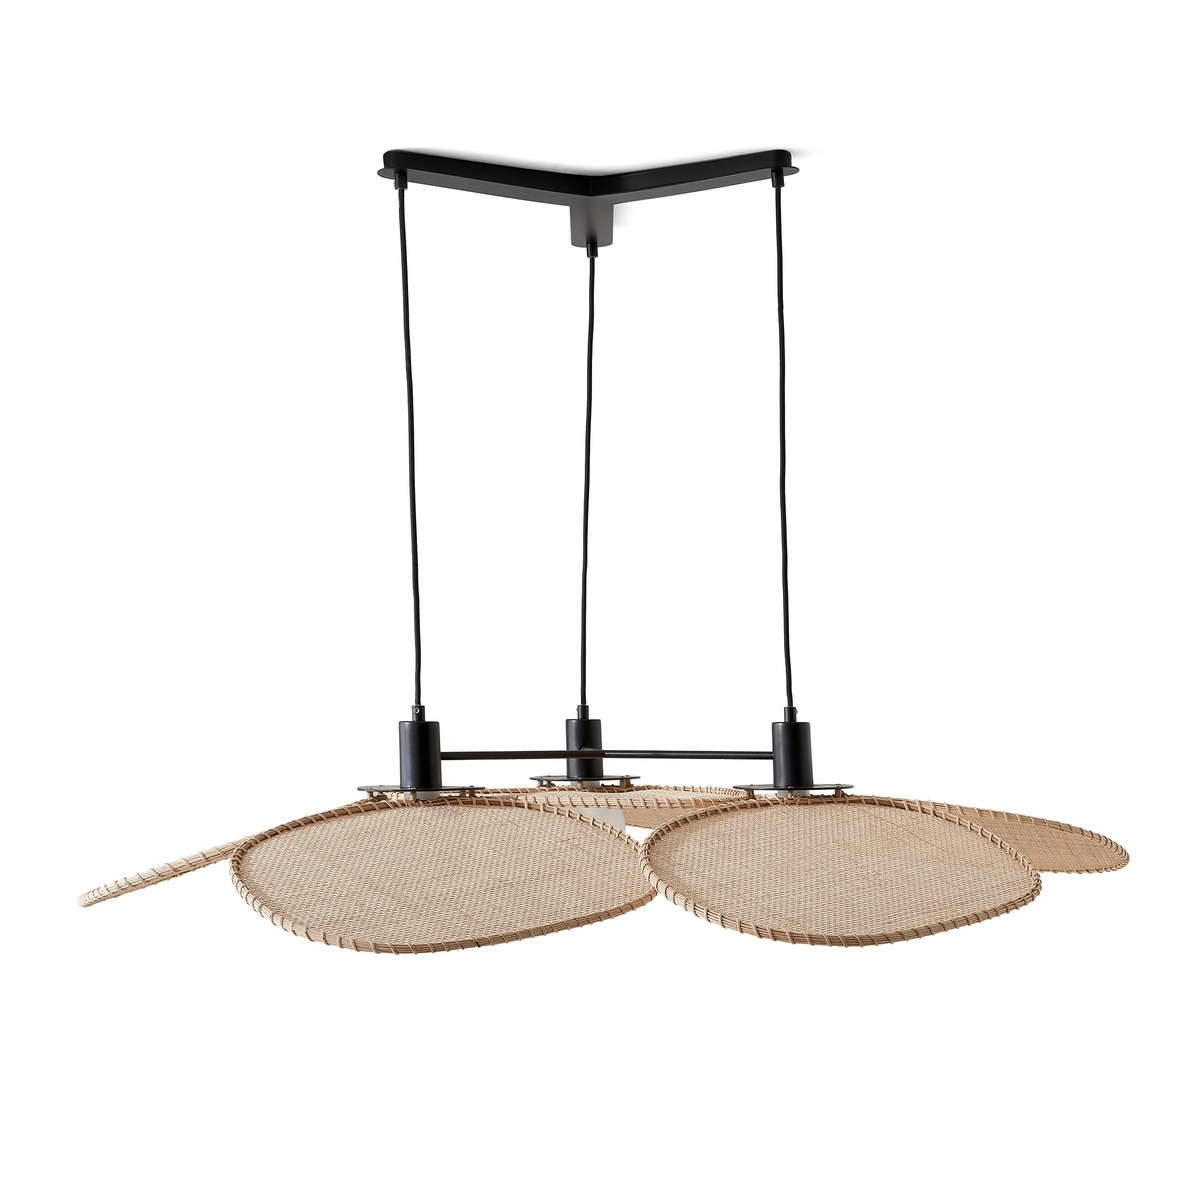 Canopée Large Rattan Ceiling Light by E. Gallina. - image 1